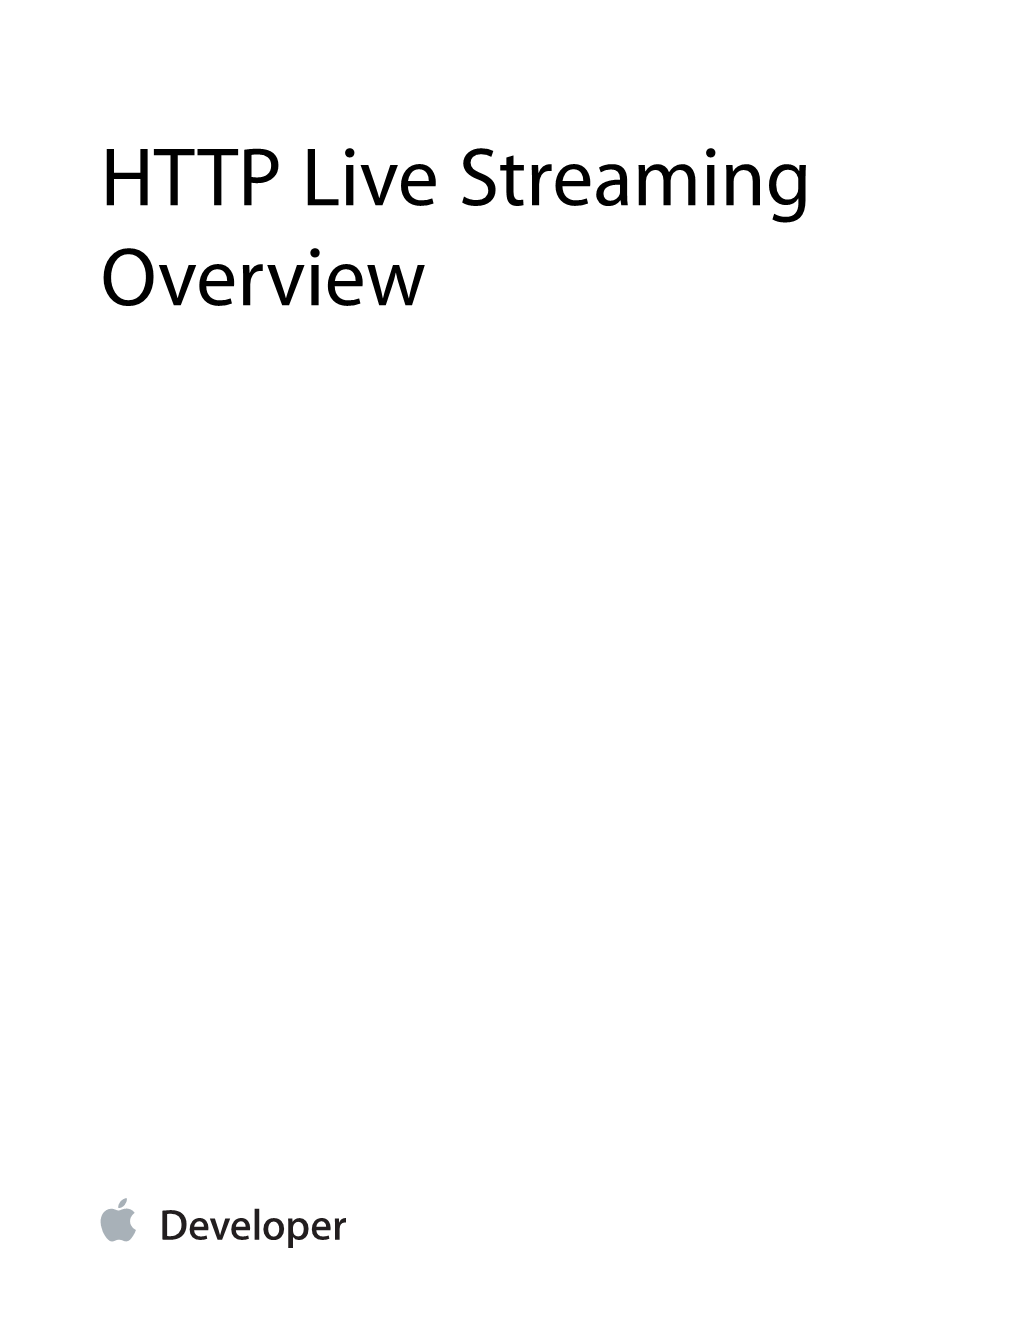 HTTP Live Streaming Overview (TP40008332 3.0.4)